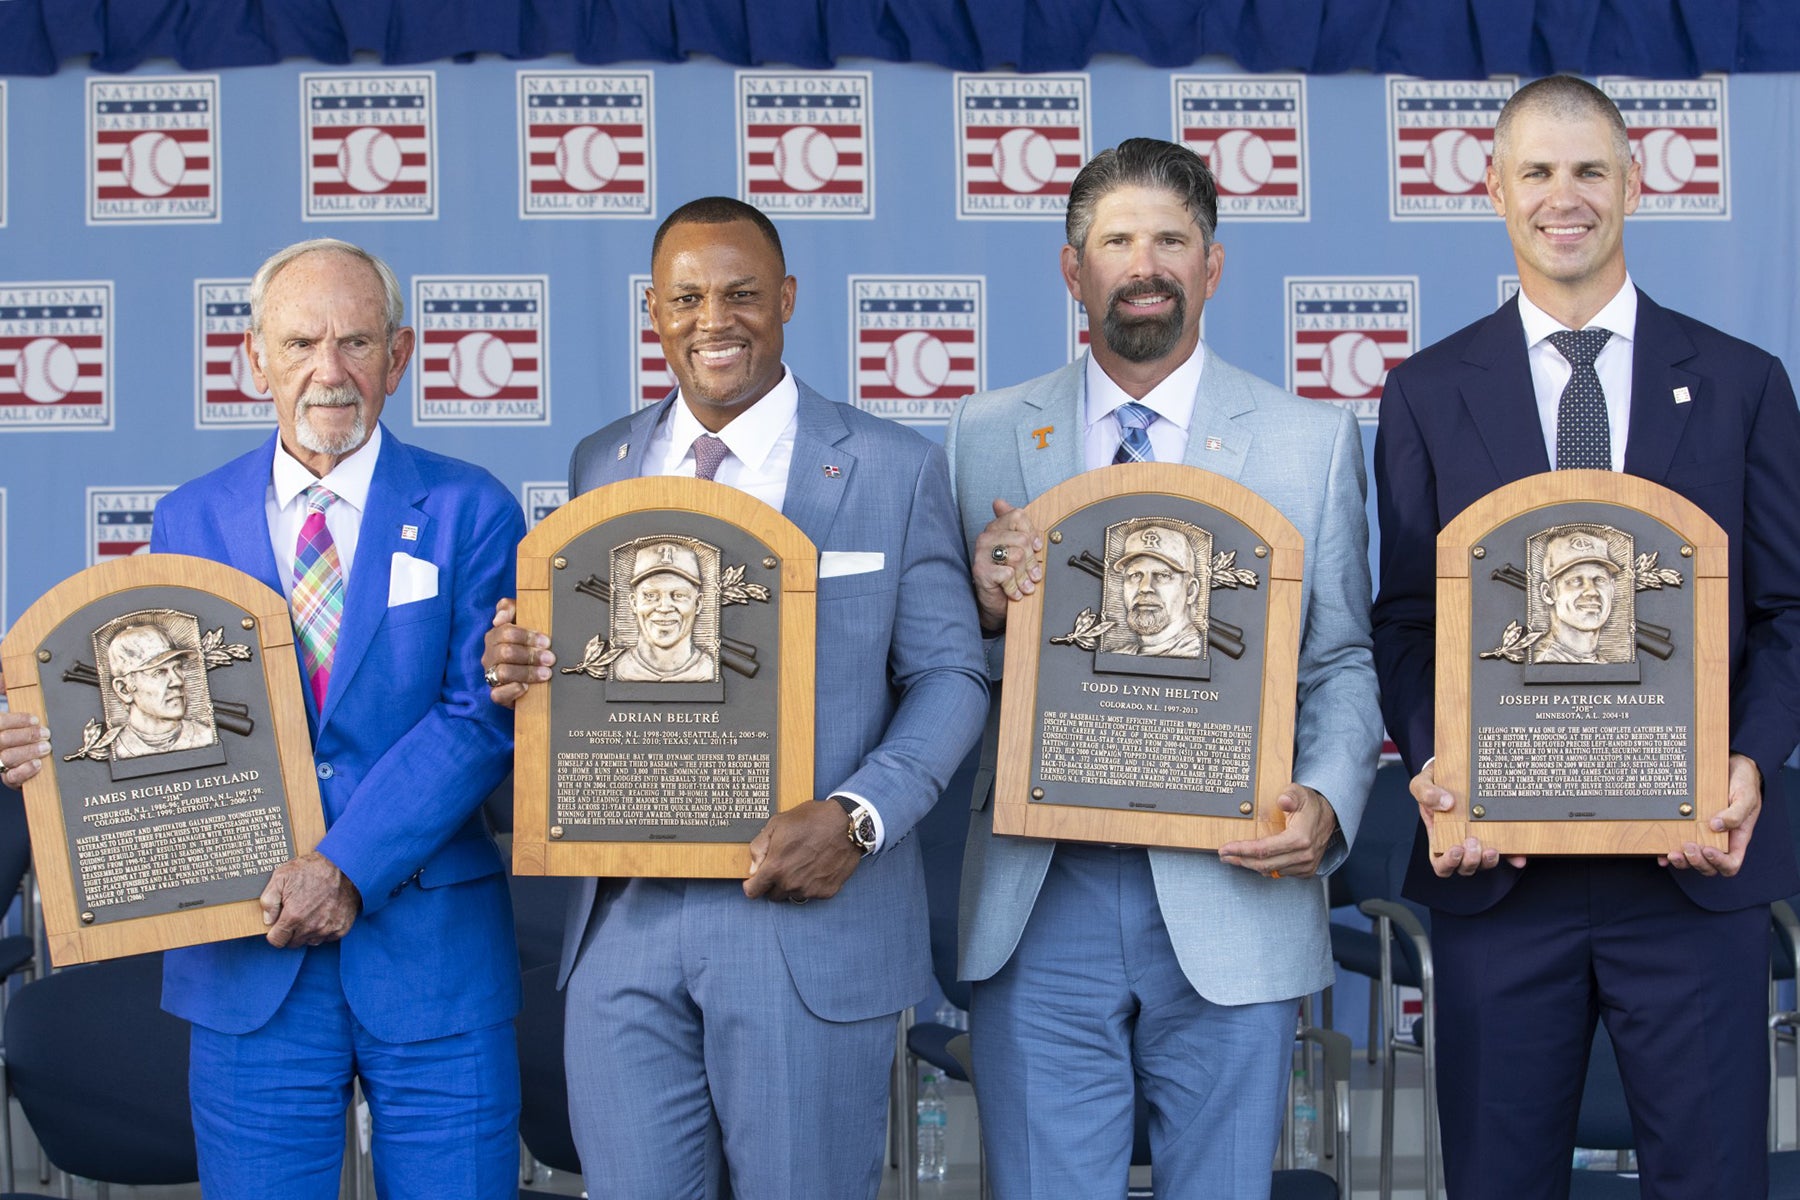 Jim Leyland, Adrian Beltré, Todd Helton and Joe Mauer holding Hall of Fame plaques